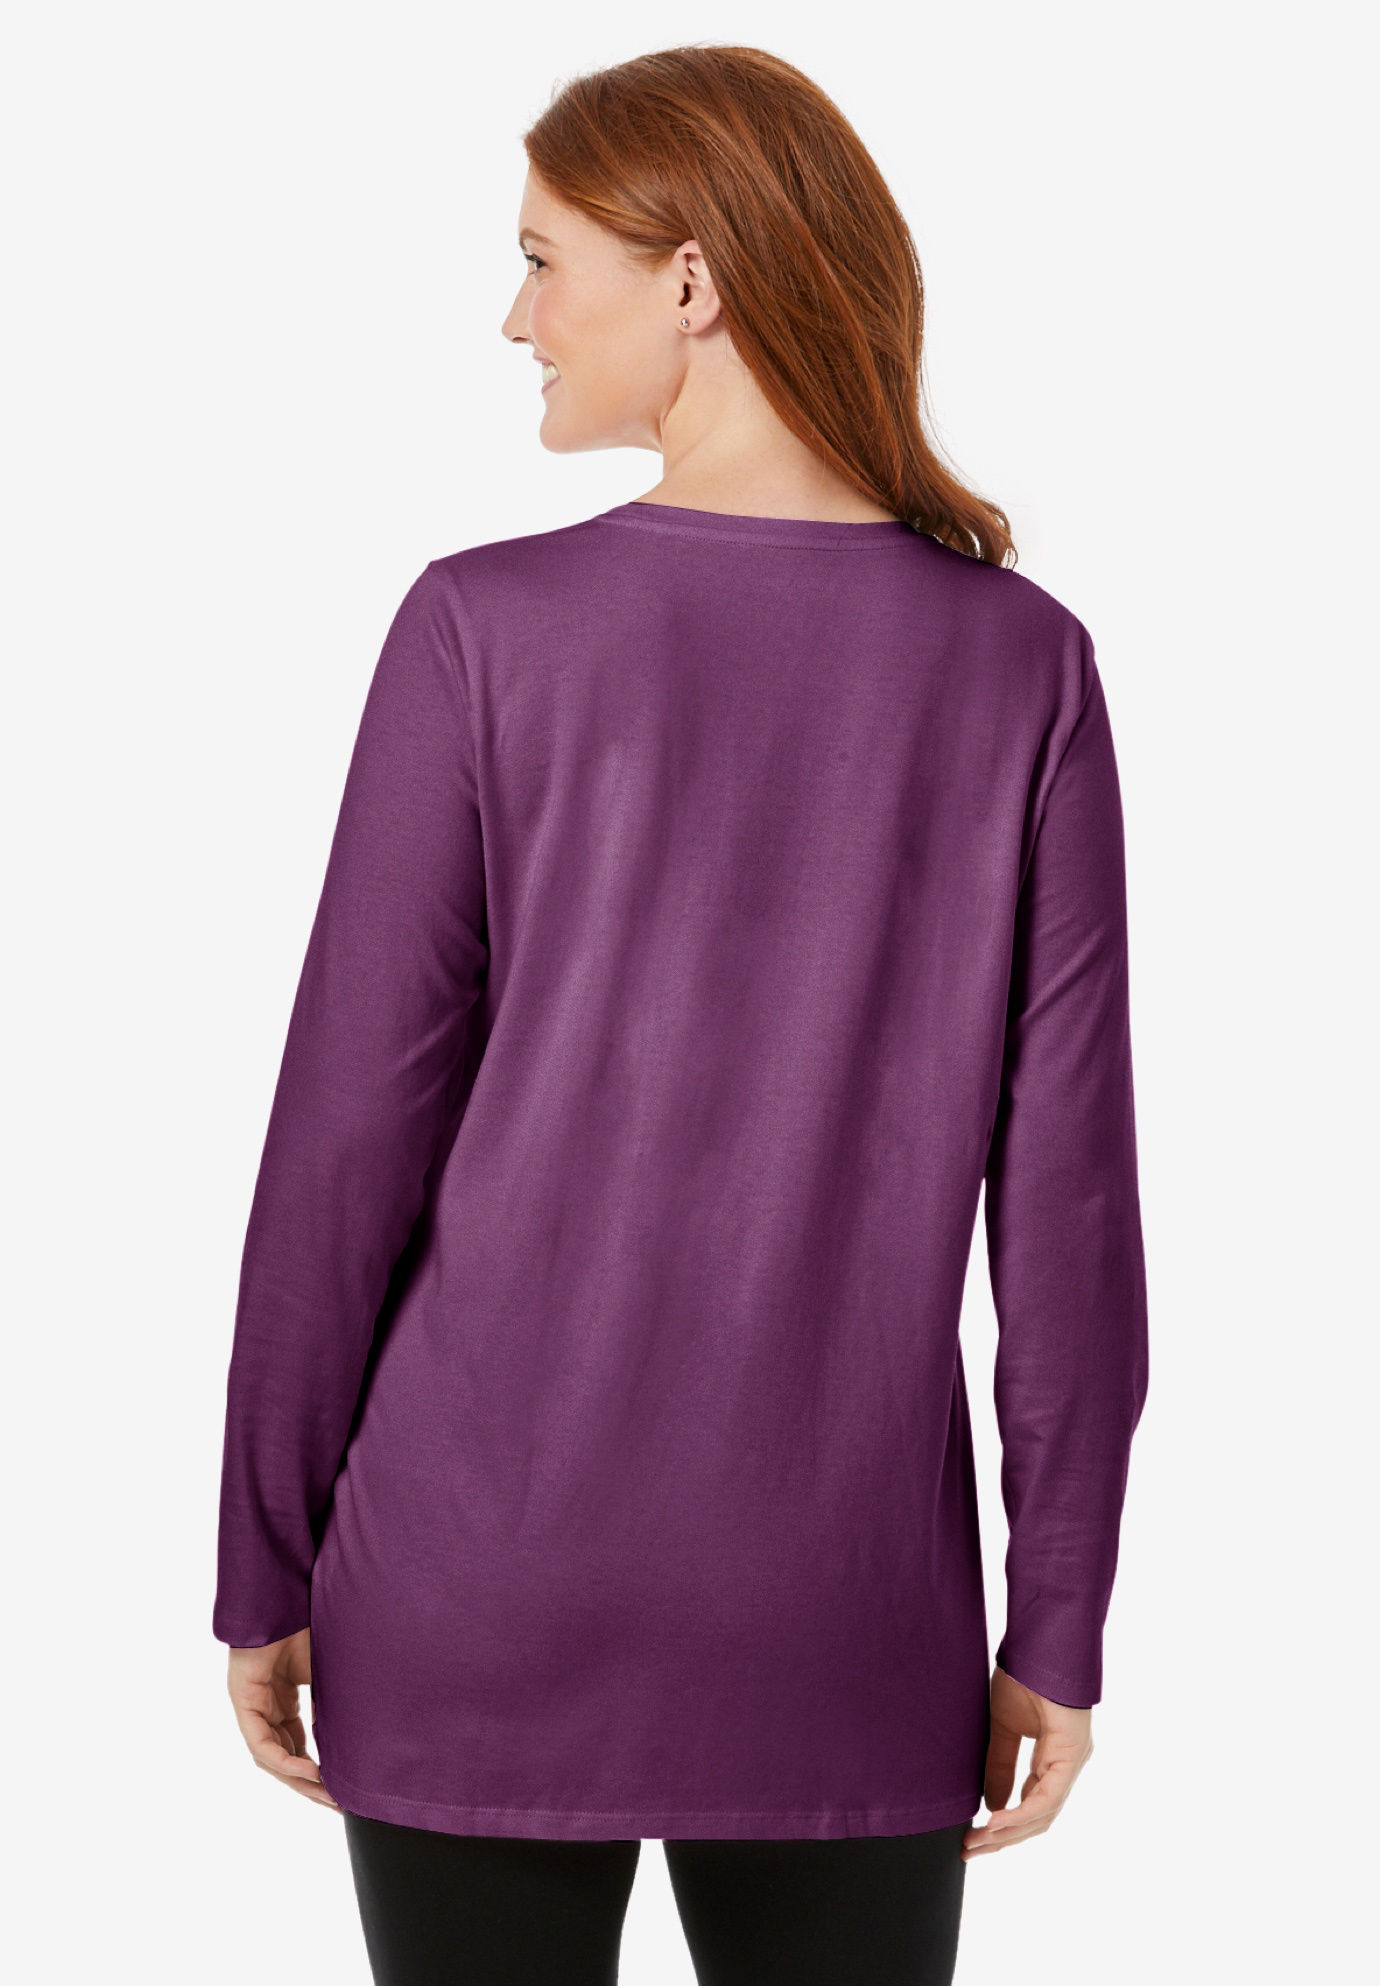 Long Sleeve Crewneck Perfect Tunic | Fullbeauty Outlet